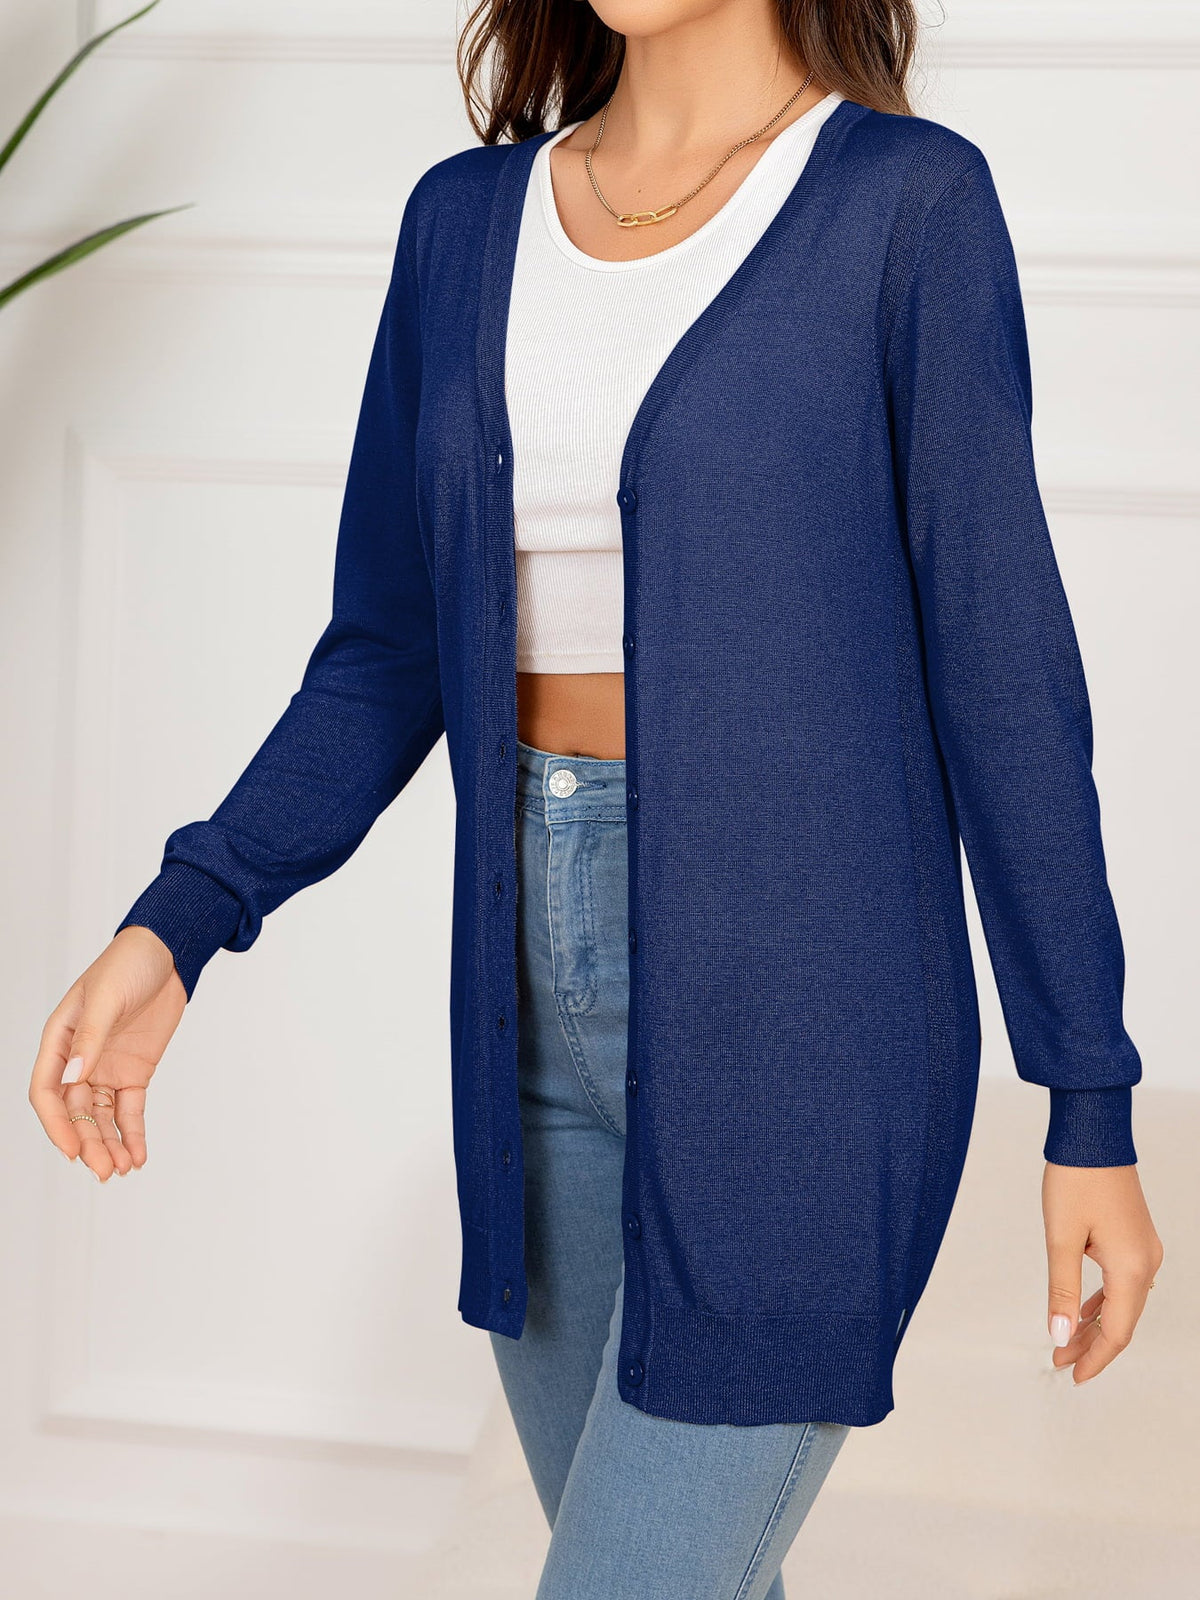 Blueberry Orchard Viscose Cardigan | Hypoallergenic - Allergy Friendly - Naturally Free